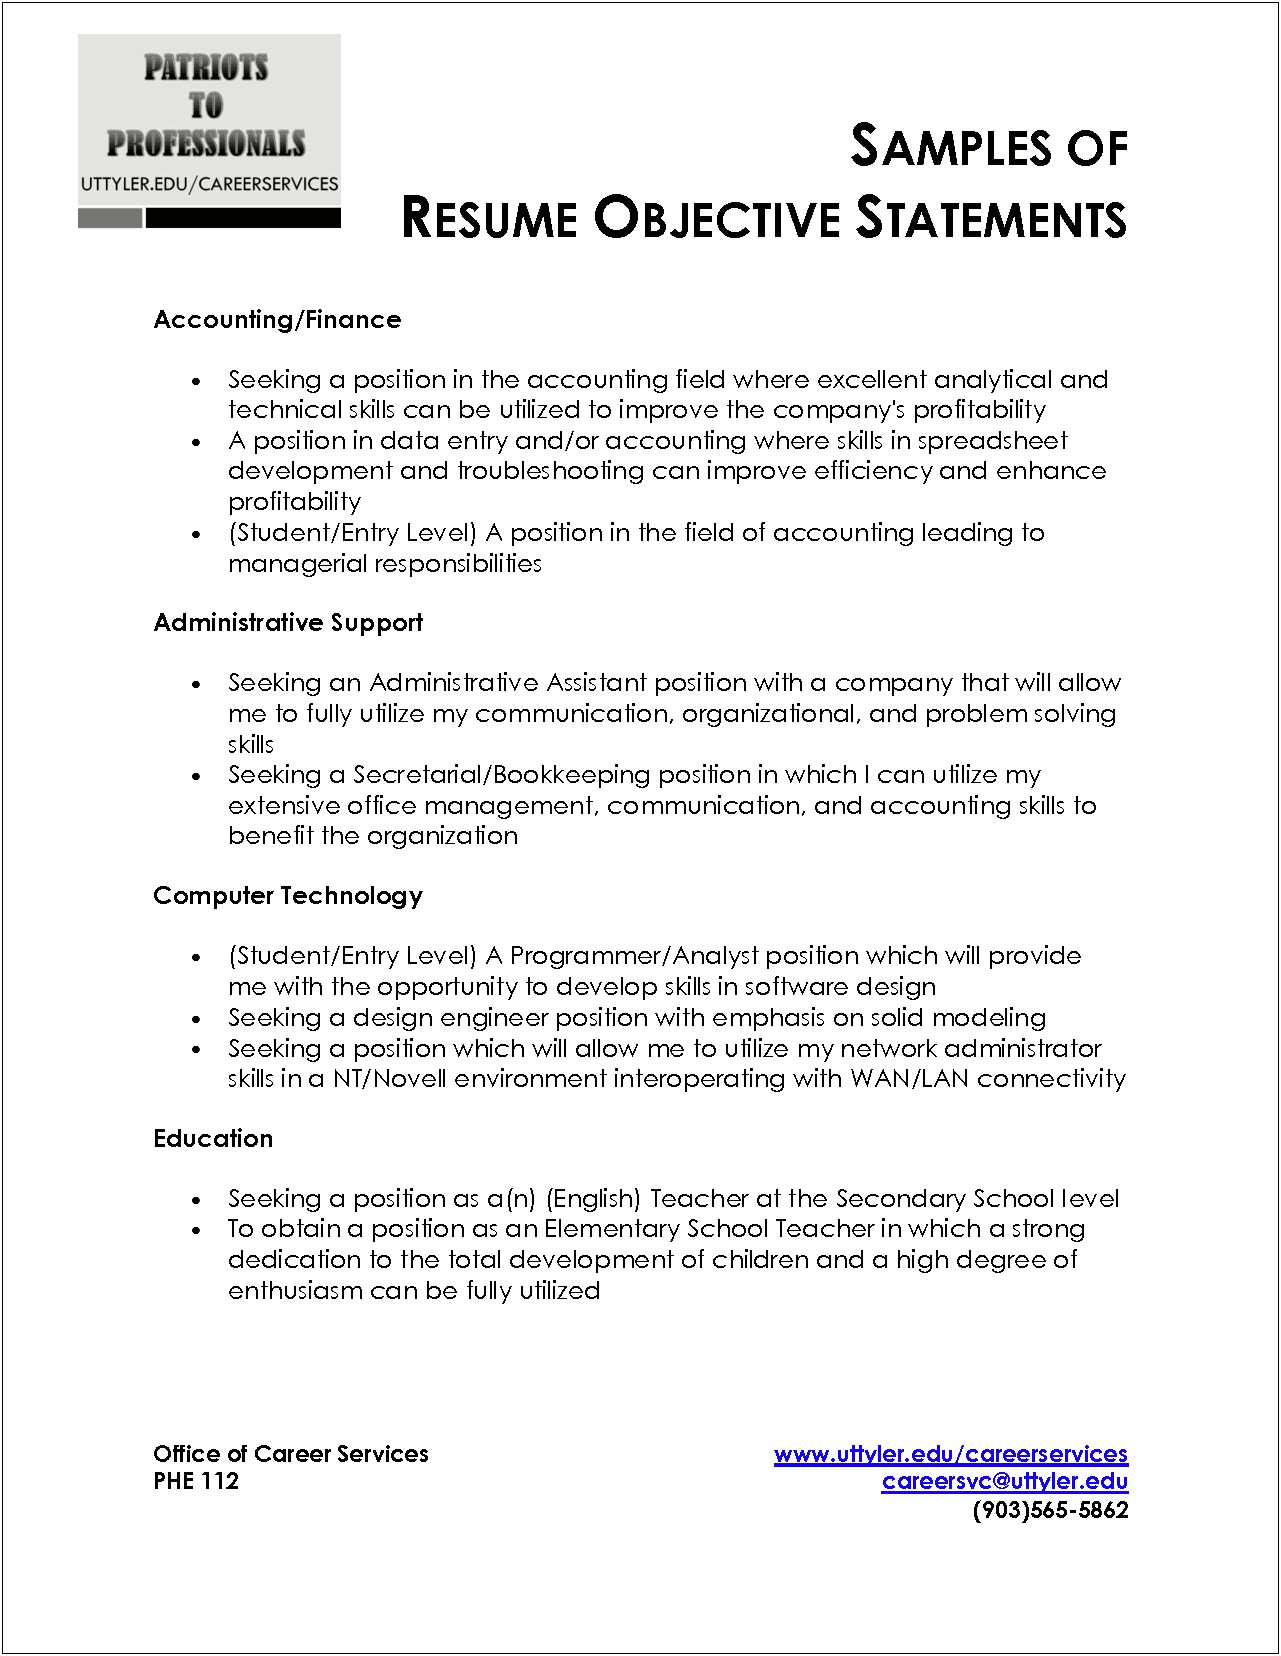 Writing A Good Resume Objective Statement